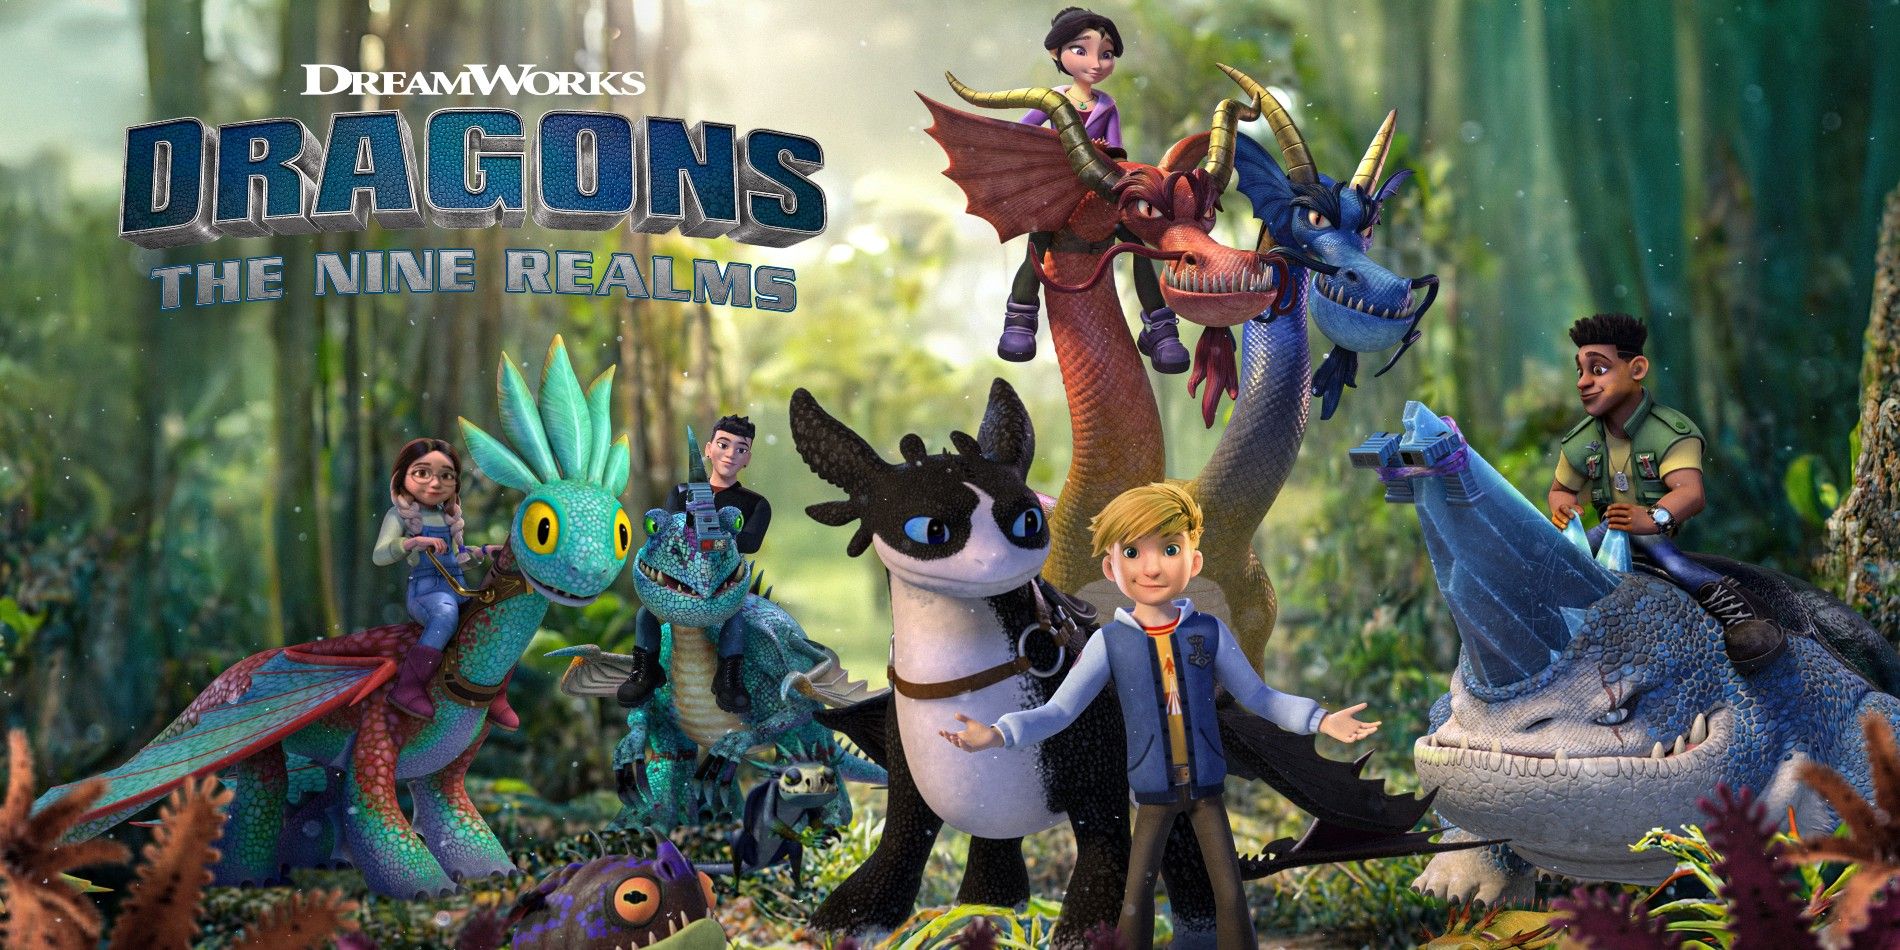 The promotional artwork for Dragons: The Nine Realms features five young characters paired with different brightly colored dragons.